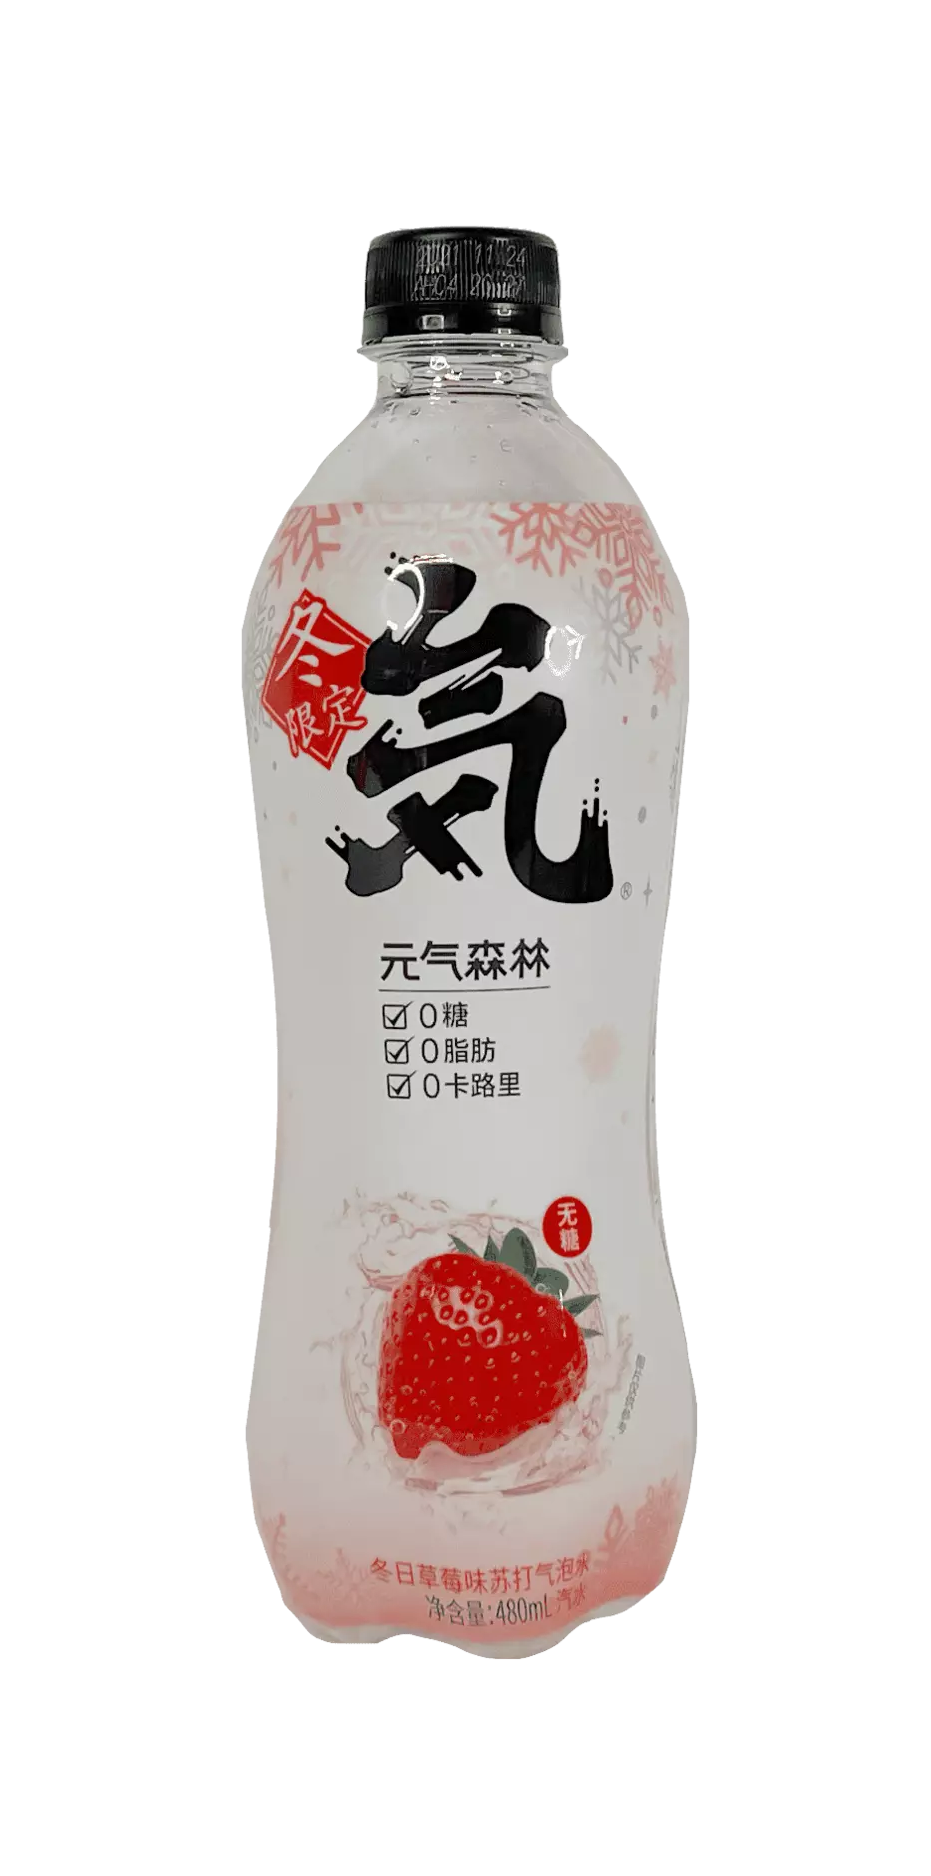 Carbonated Water With Strawberries Flavour 480ml / Bottle Yuan Qi Sen Lin China